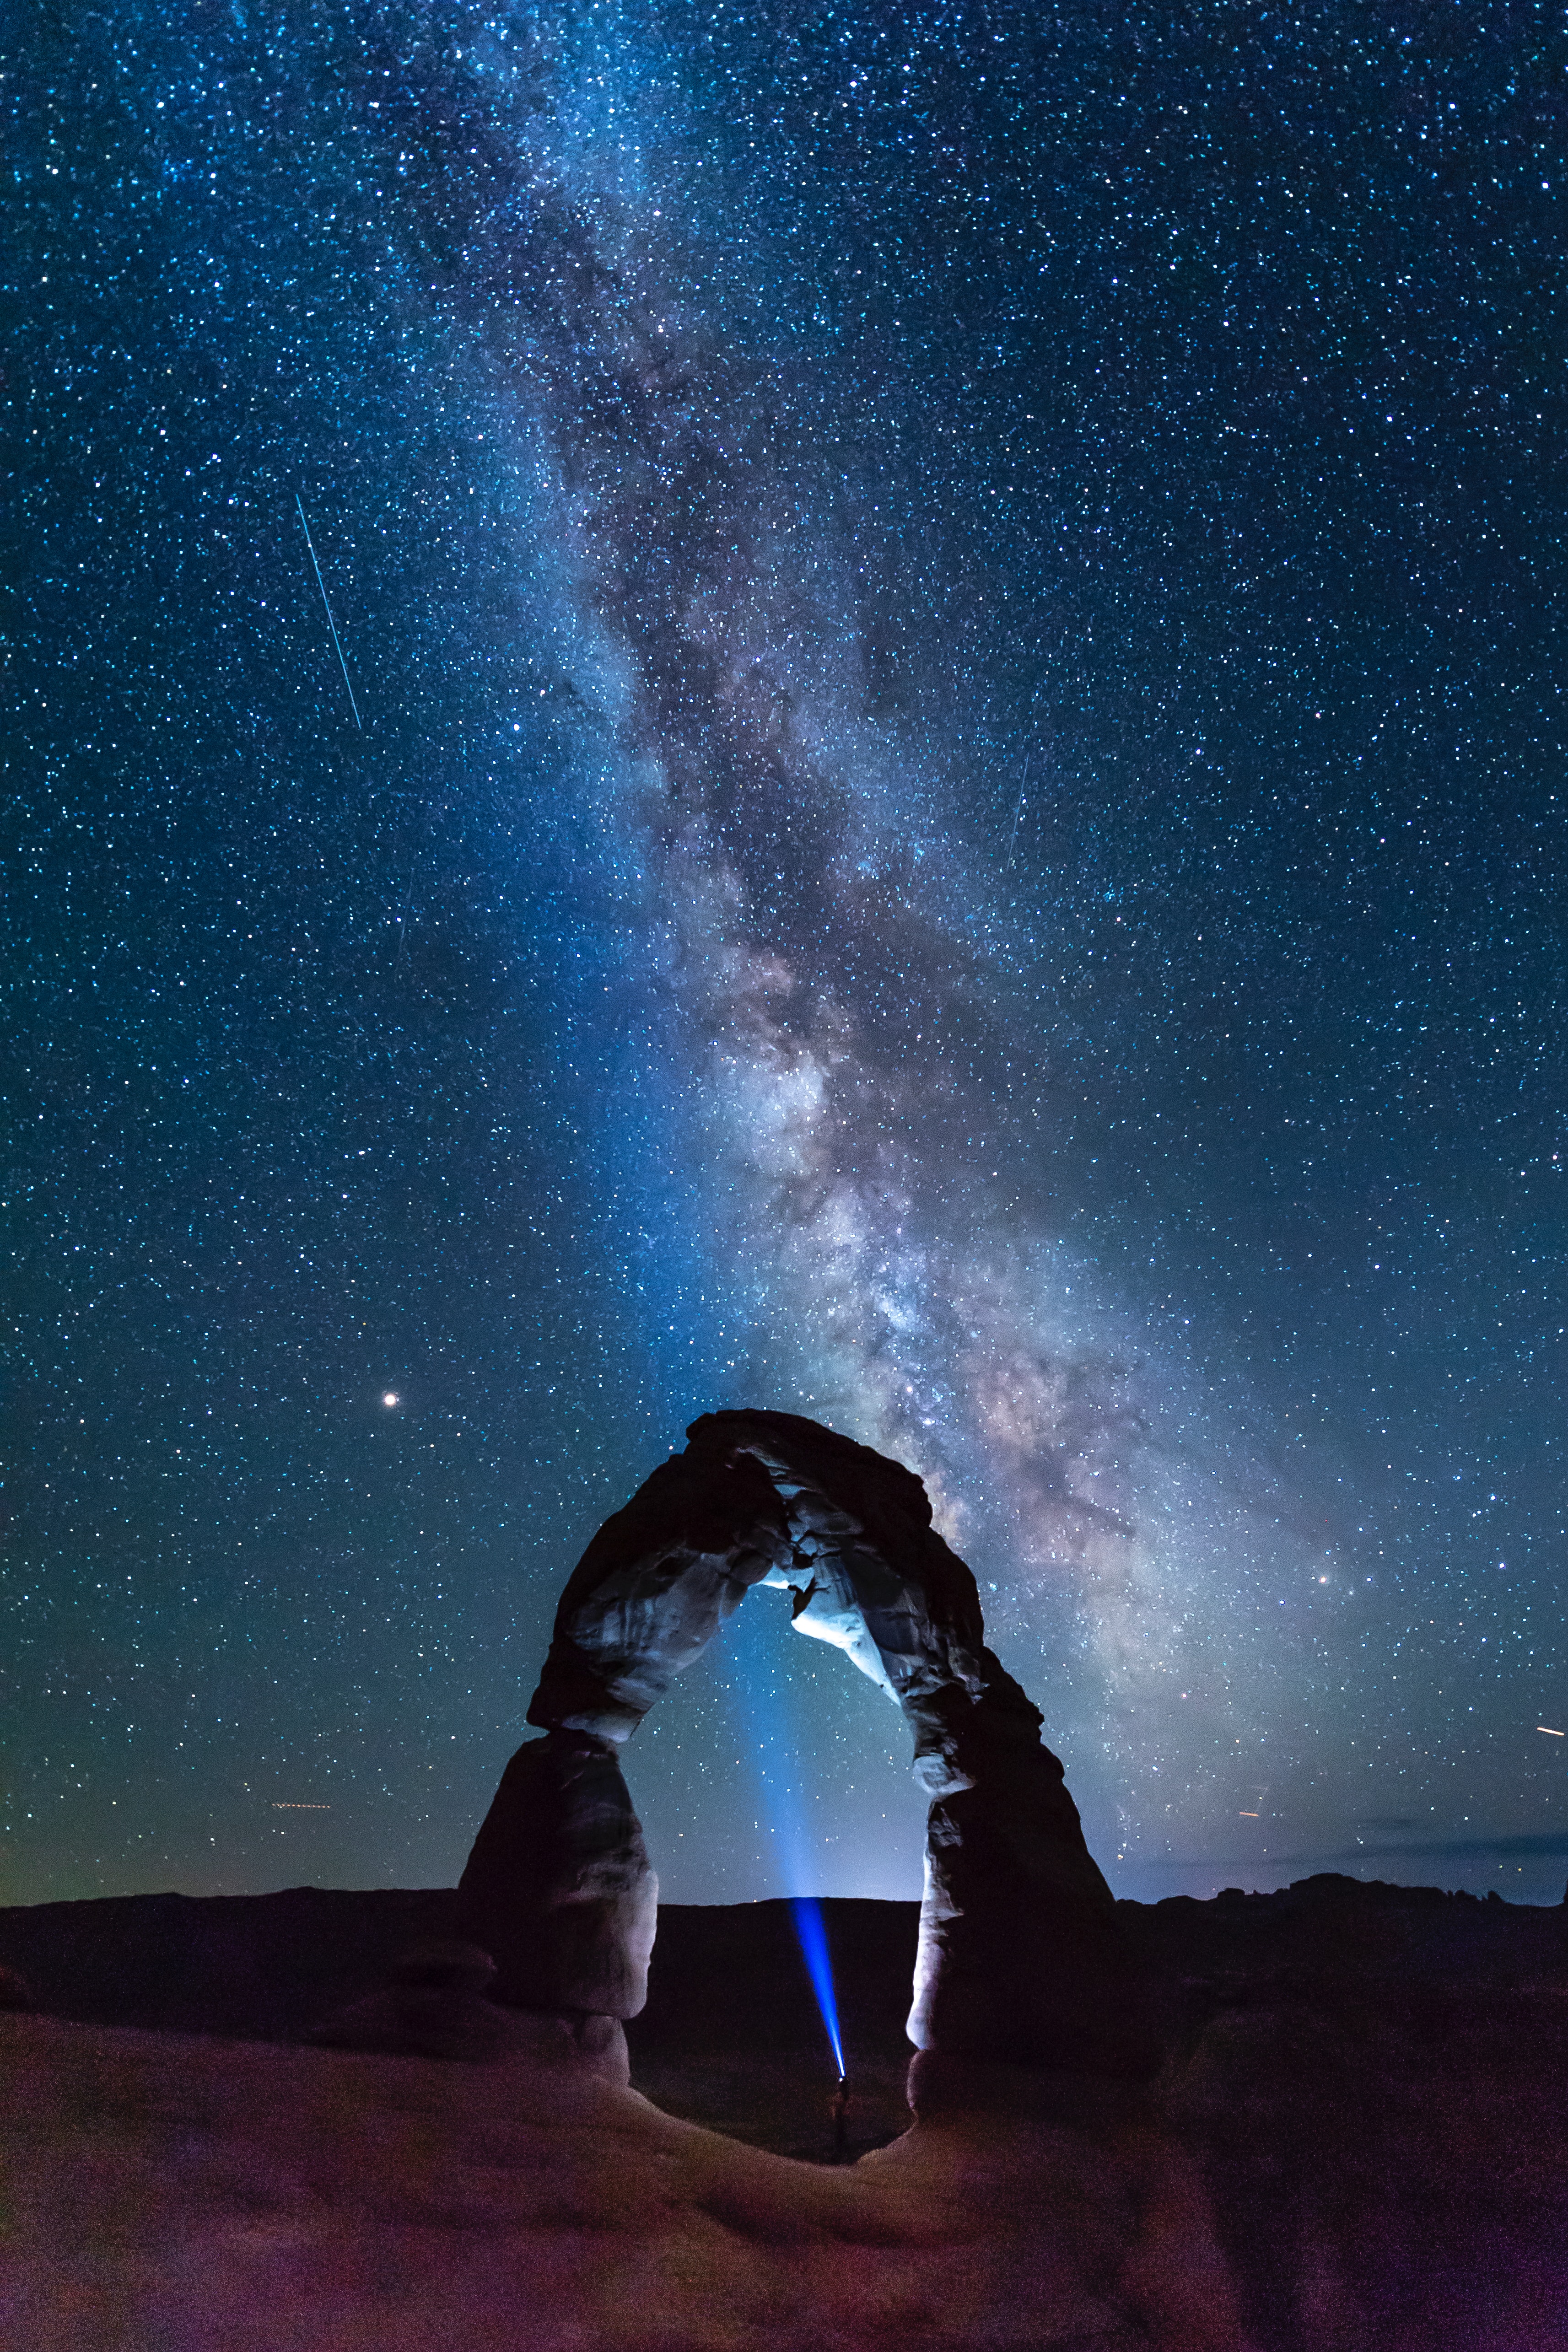 4K, FHD, UHD arch, nature, starry sky, night